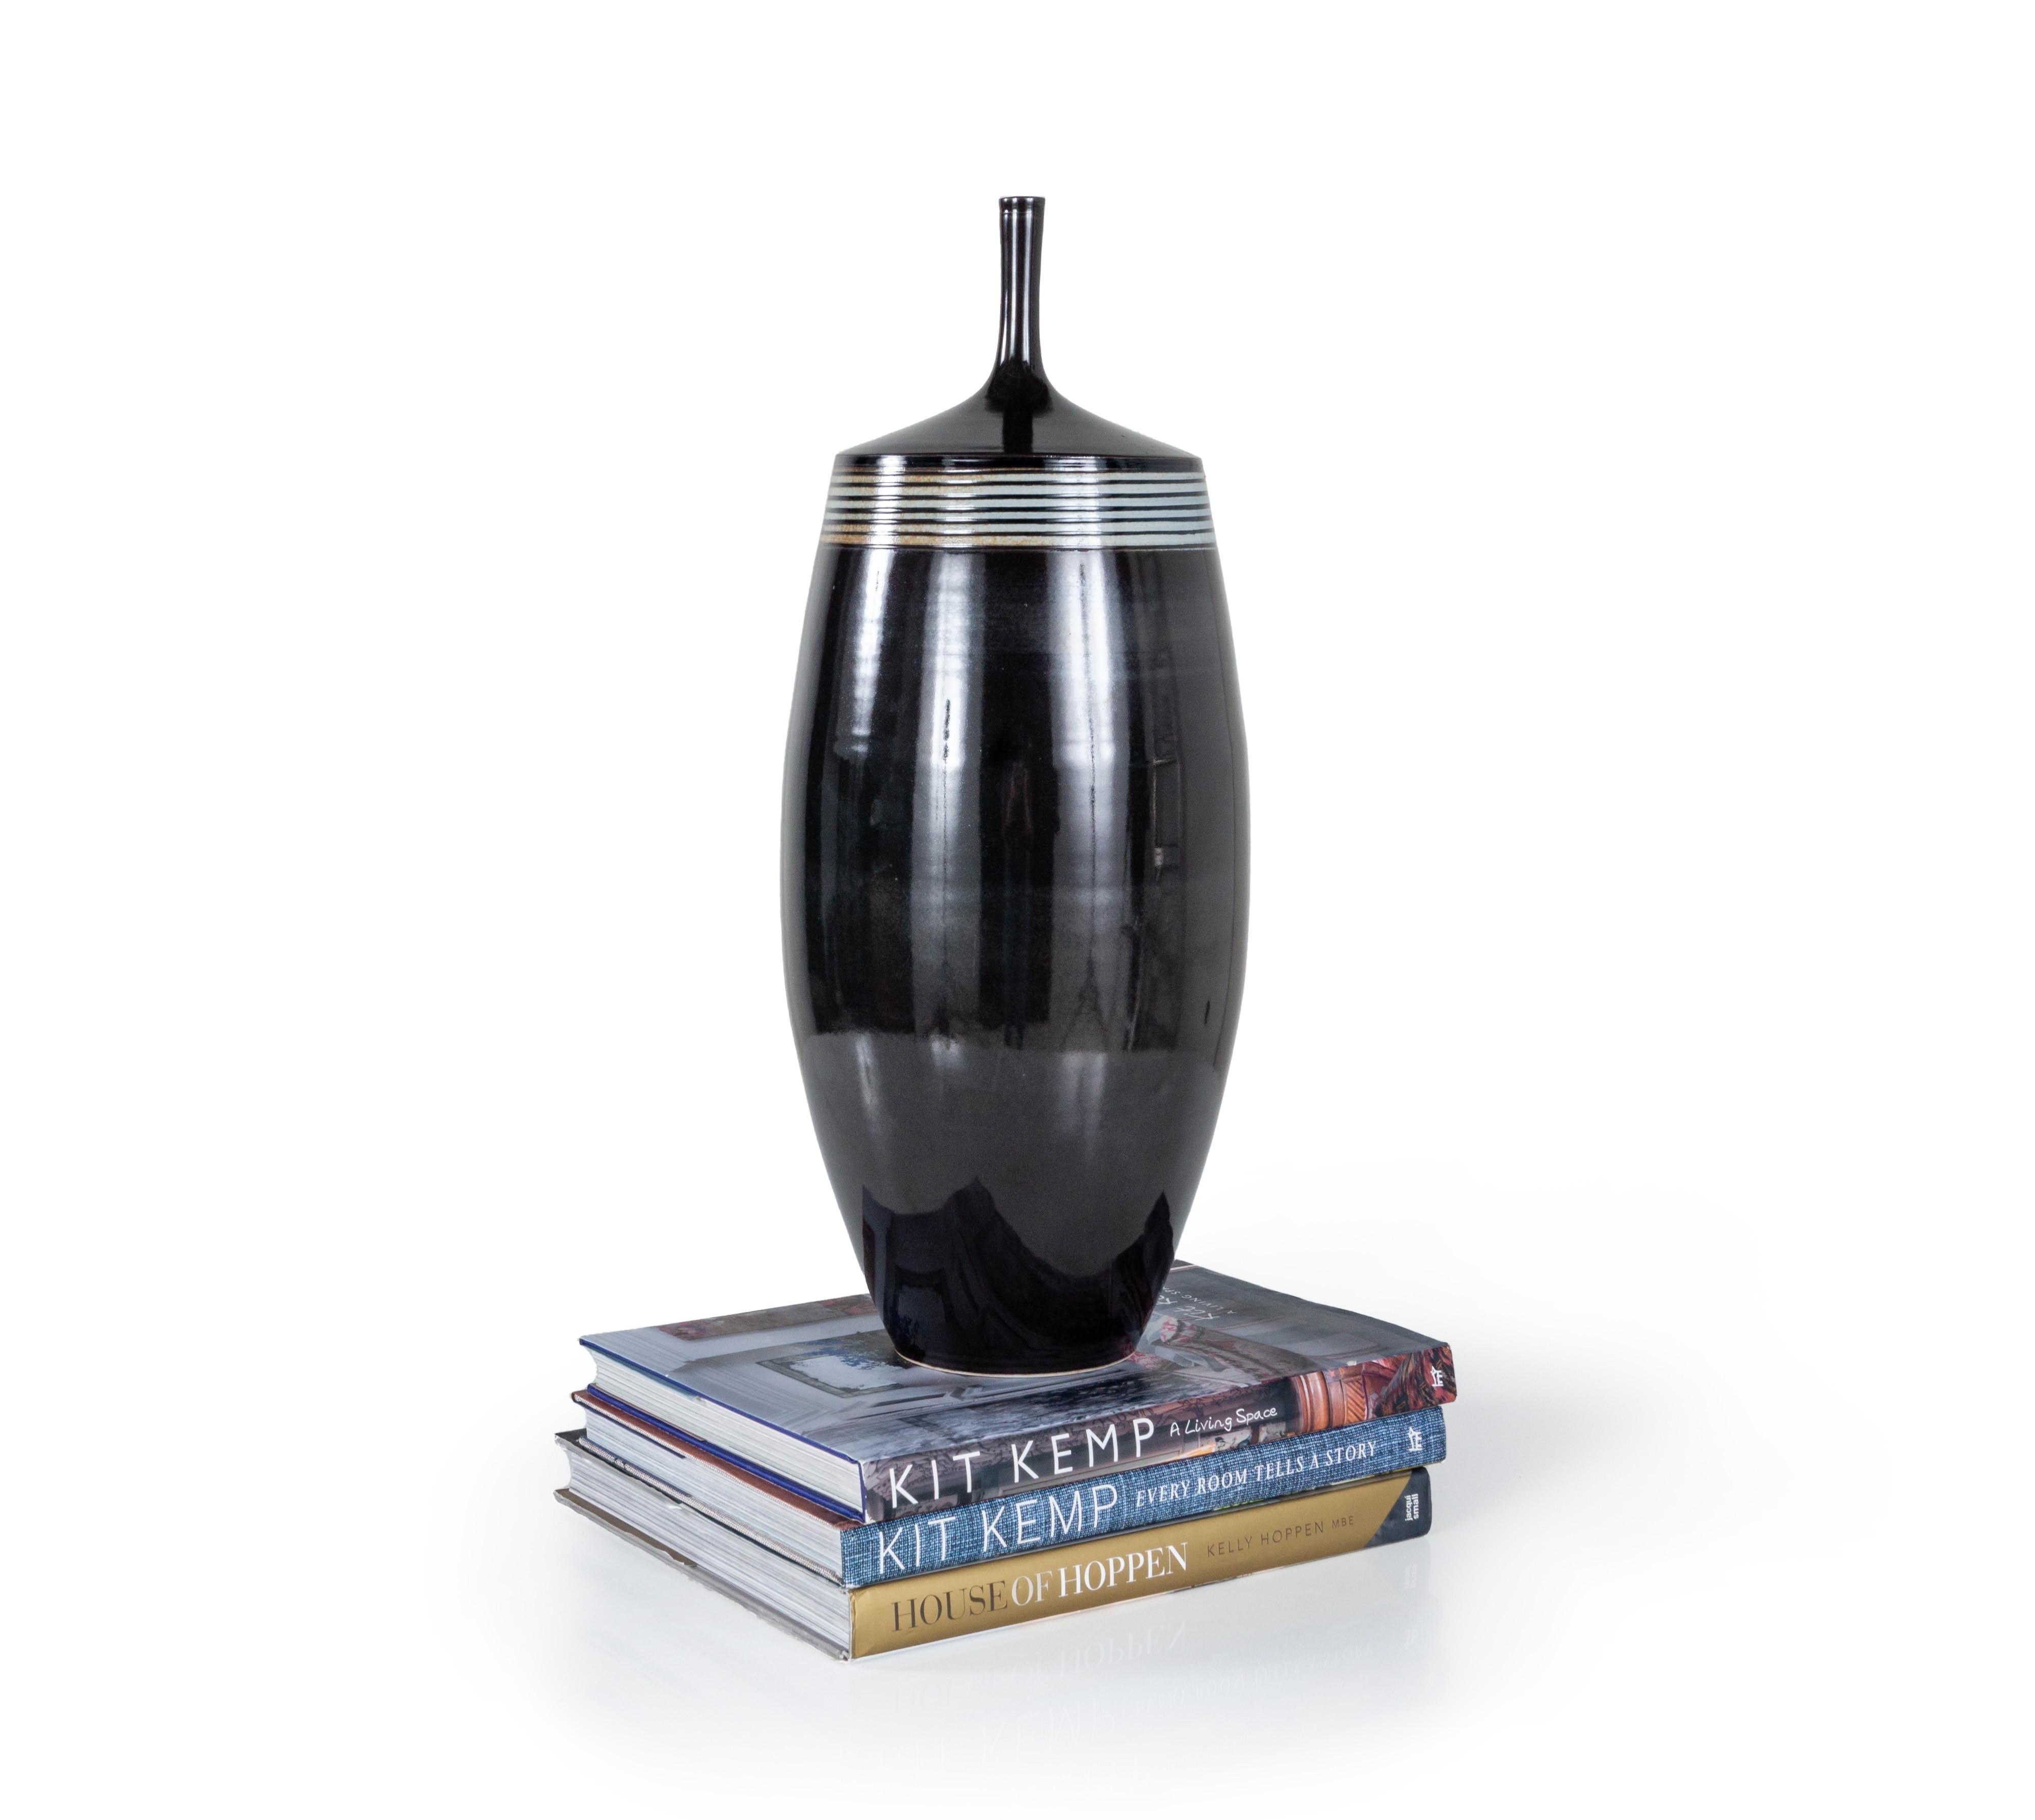 The Vintage Stephen Merritt Vase is a beautiful jar and pottery piece from the acclaimed contemporary artist, Stephen Merritt. The vessel is made of high-fired earthenware and has a glazed polish finish with a subtle striped pattern at the top. This